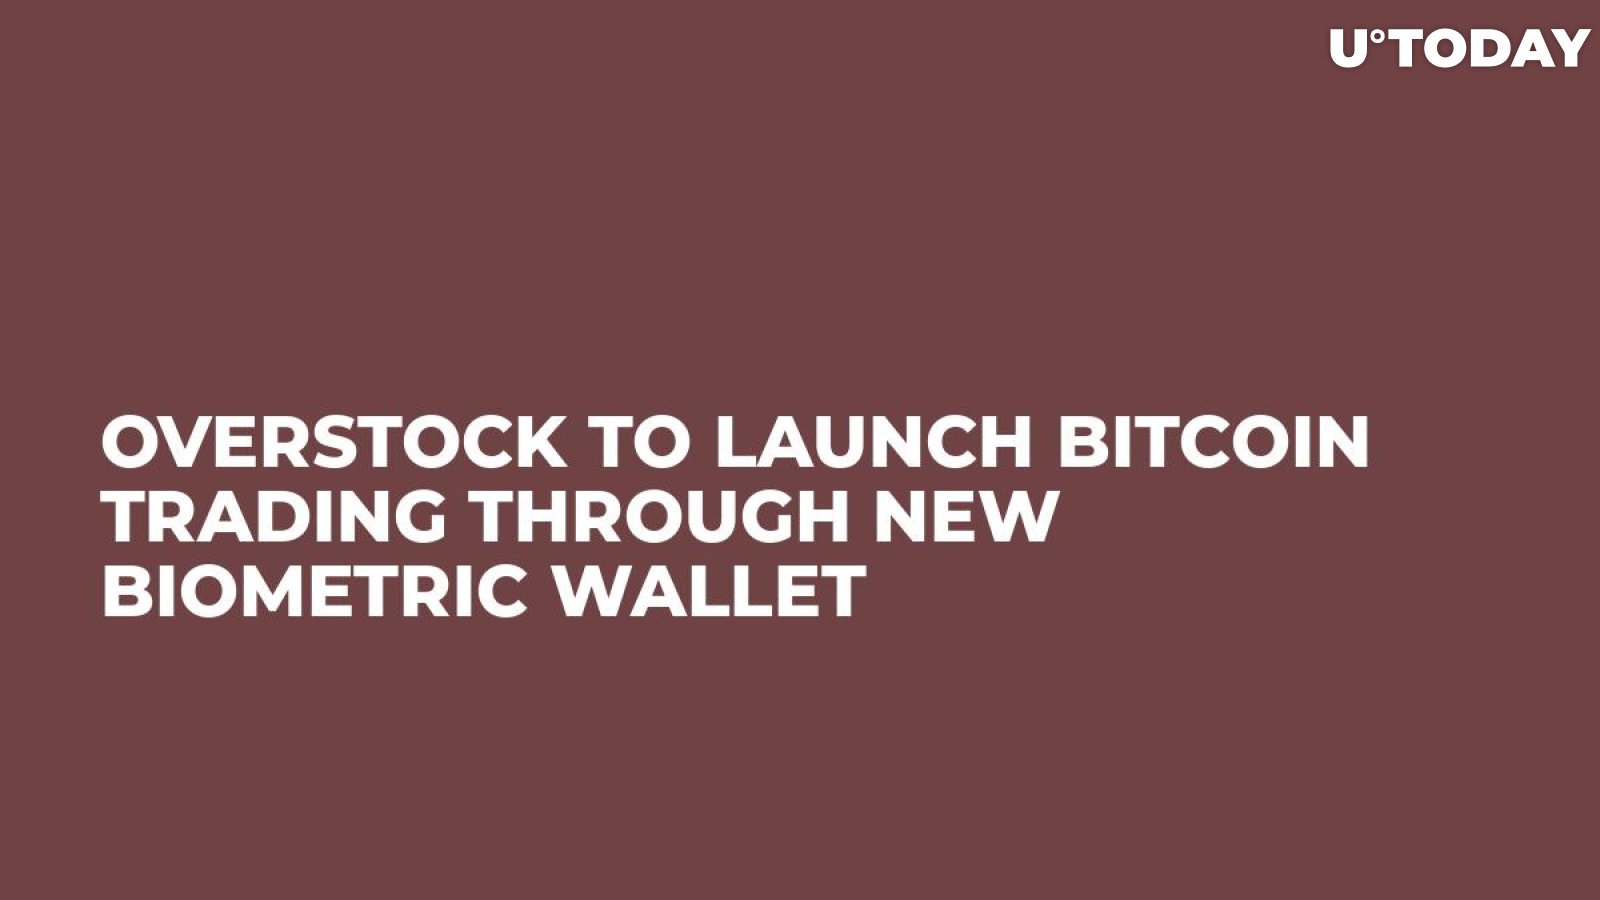 Overstock to Launch Bitcoin Trading Through New Biometric Wallet